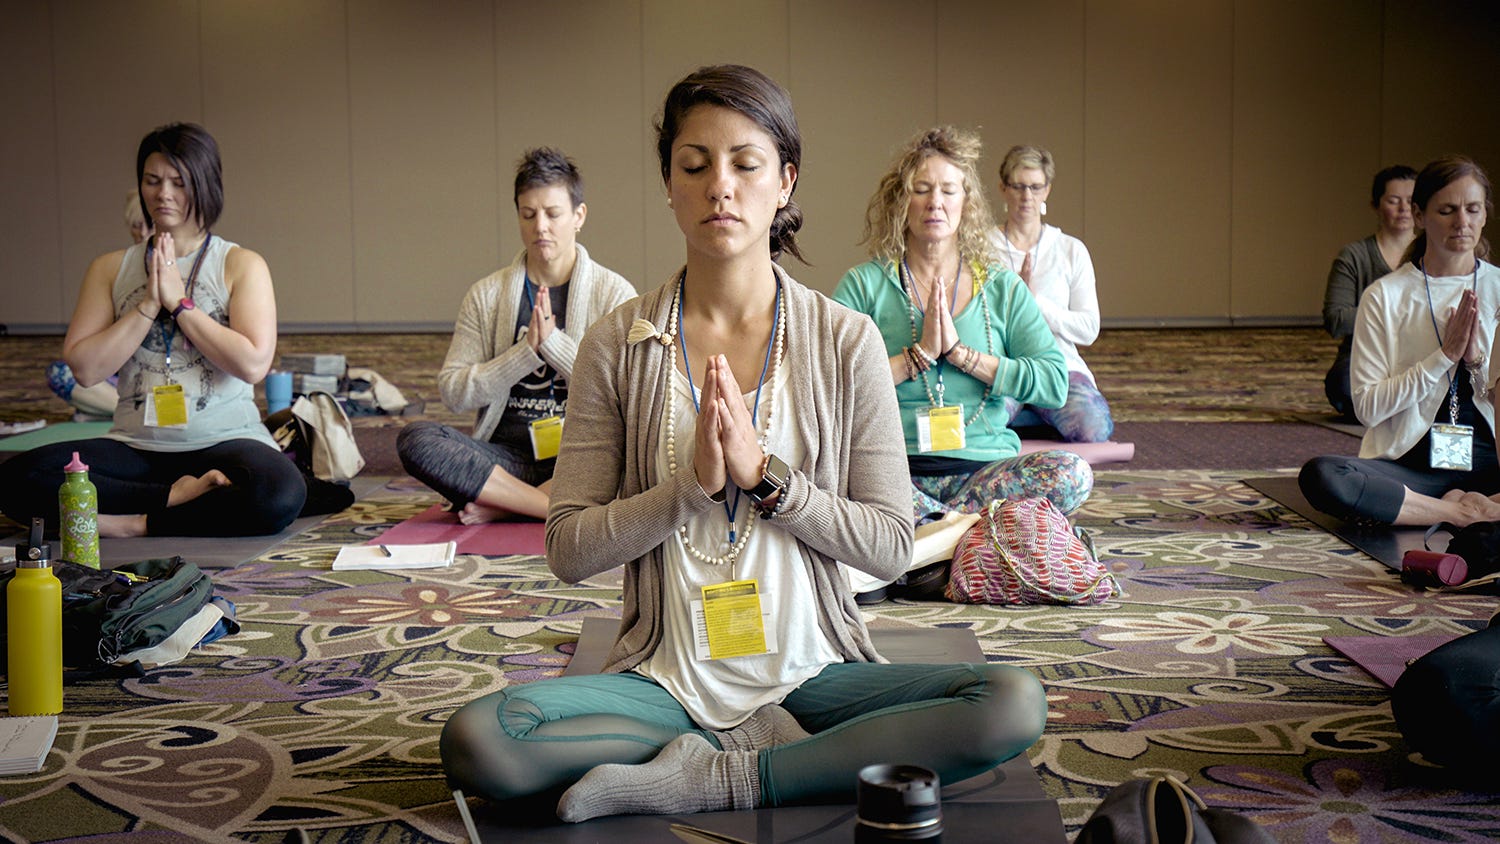 Today, I Cried in Yoga Class. Rethinking what the Evangelical